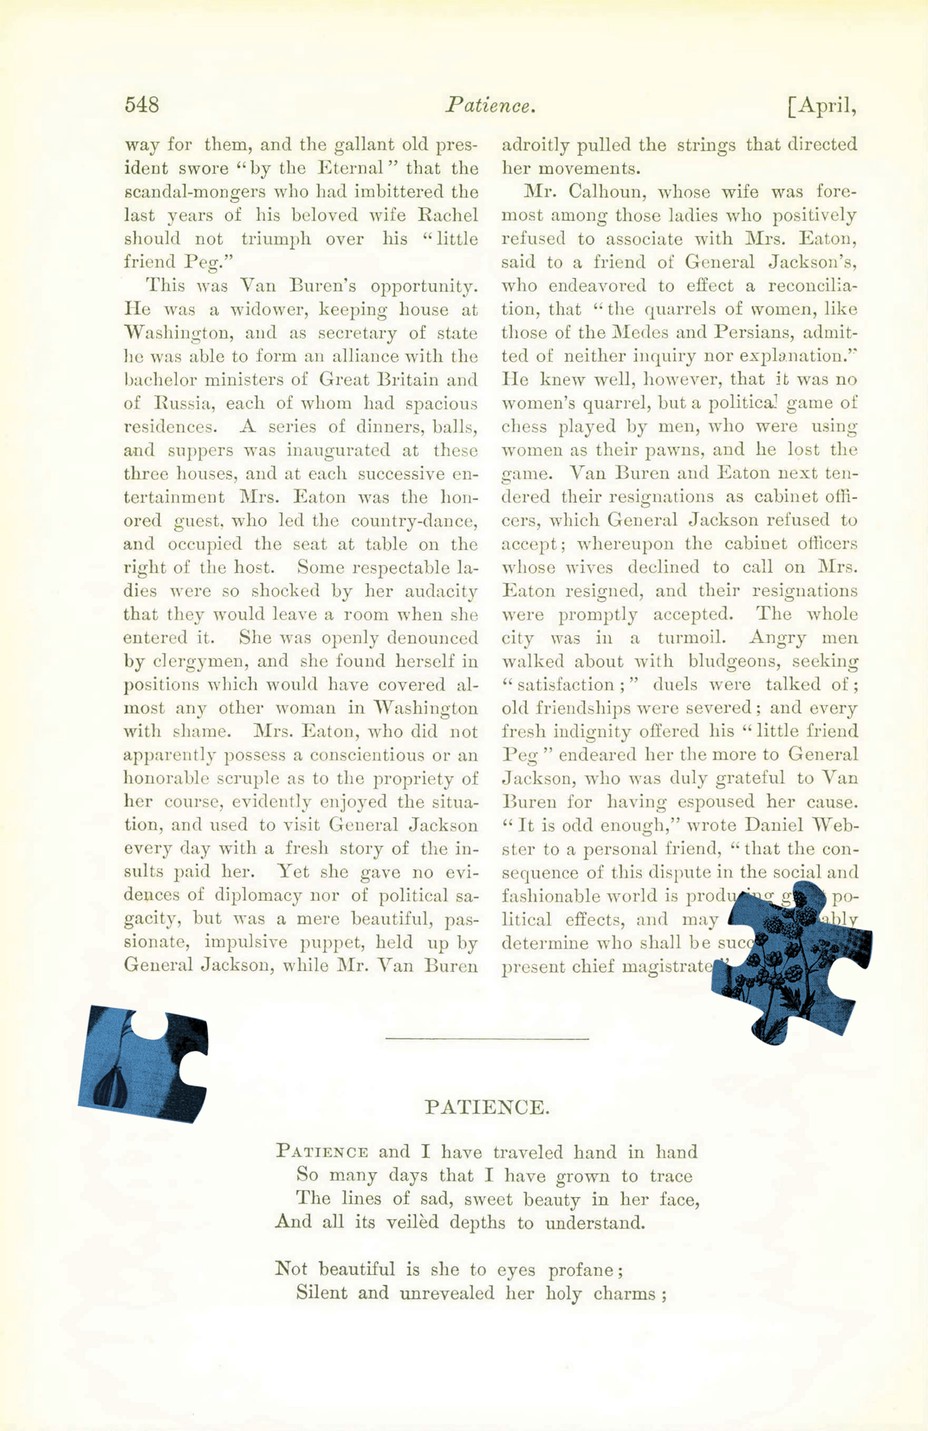 original magazine page with blue puzzle pieces painted on